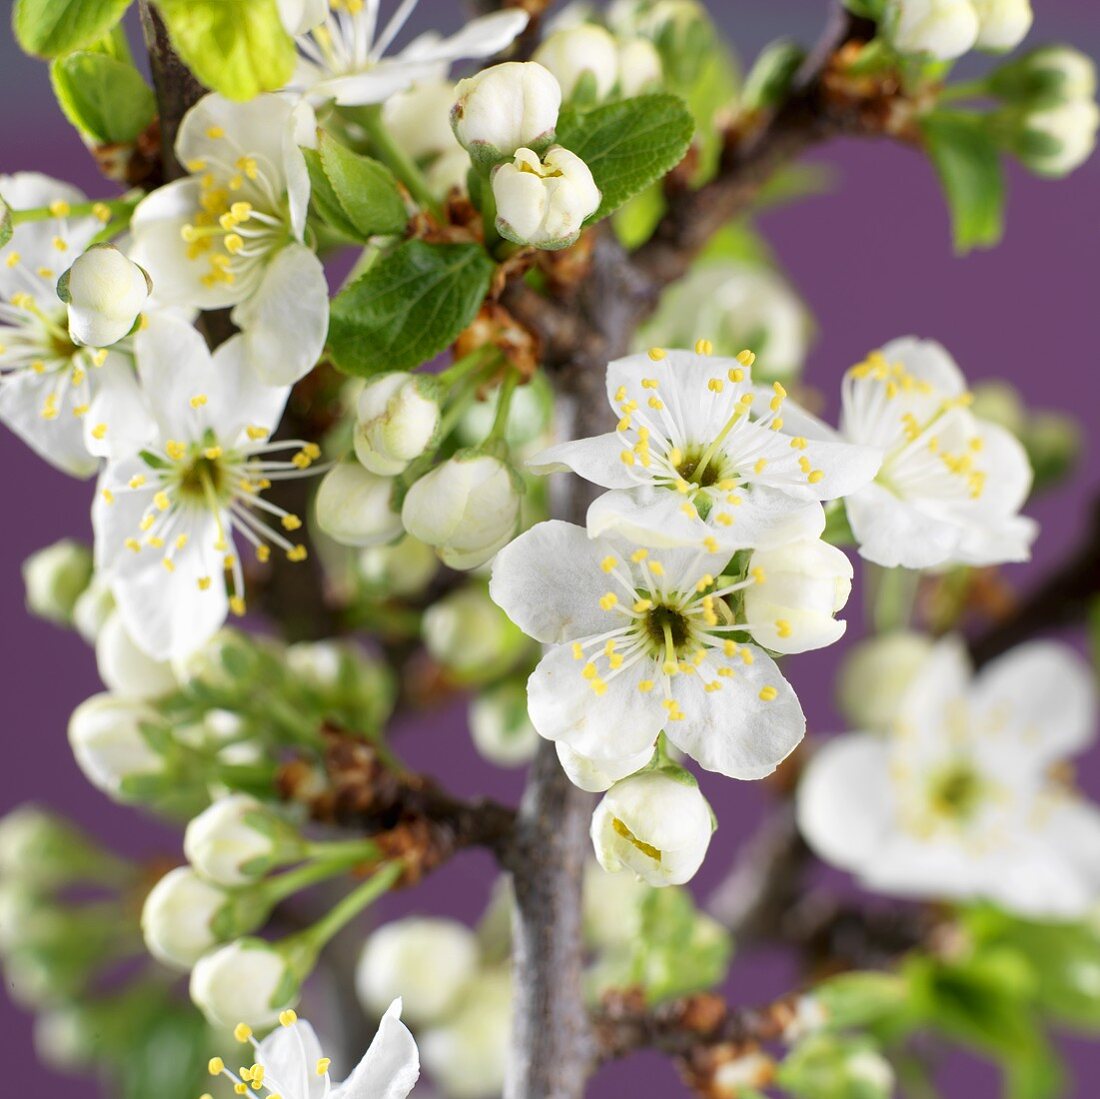 Branches of plum blossom (close-up)